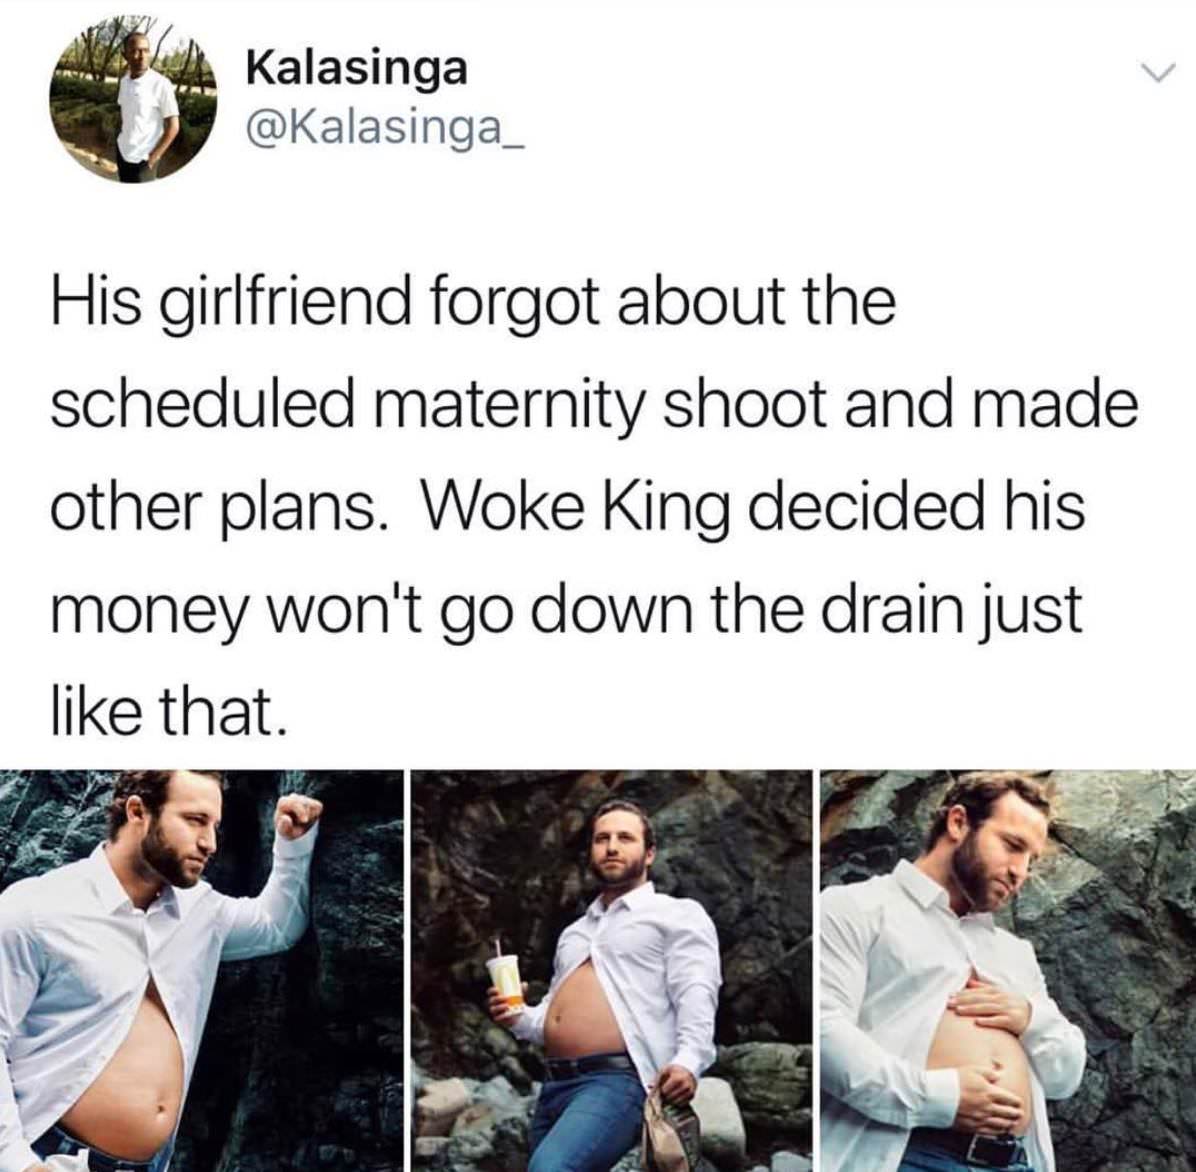 memes - woke king - Kalasinga His girlfriend forgot about the scheduled maternity shoot and made other plans. Woke King decided his money won't go down the drain just that.